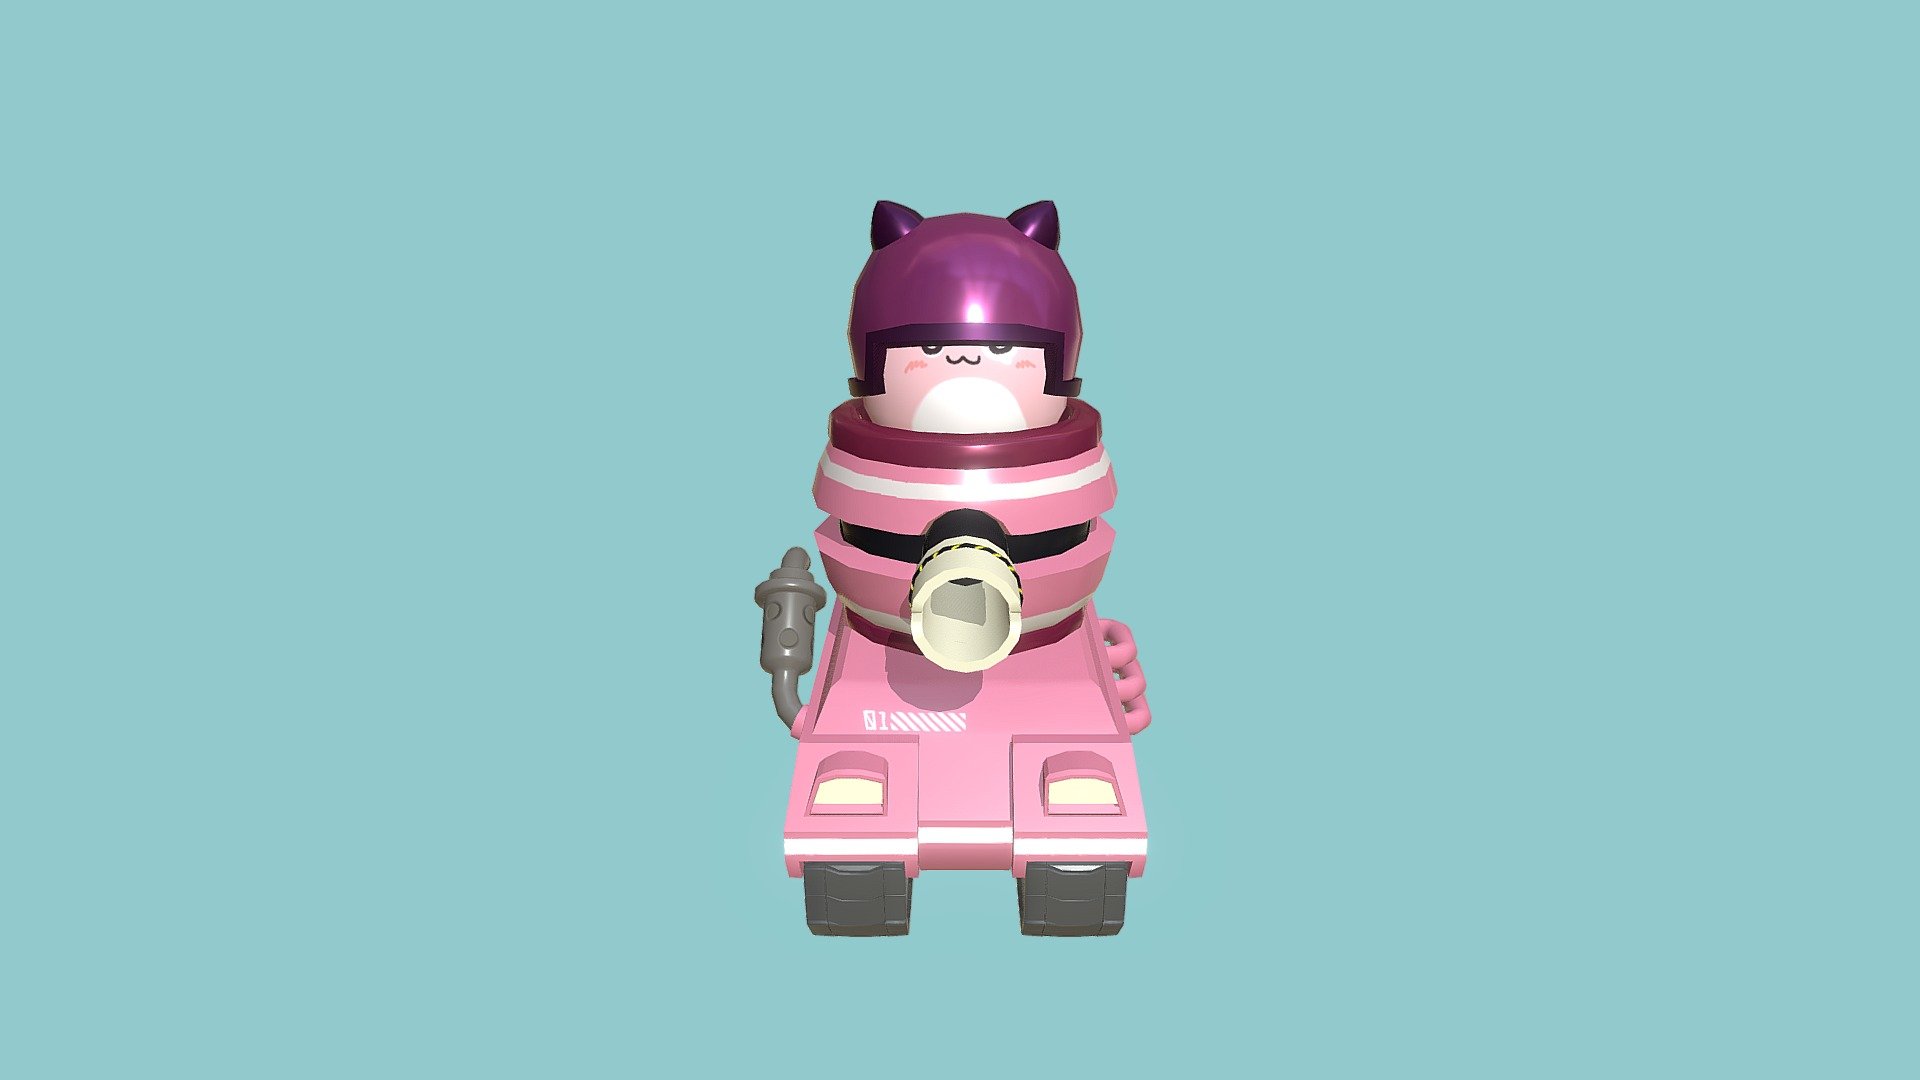 Hi SketchFab! 

I'm sharing a low poly model from my school project. We have to design a stylized tank and I decided to make this pinky one. It's inspired by Pink Bean, a cute monster from the videogame Maplestory. 

Hope ya guys liked it and any feedbacks are welcomed! - Tank N_1 - 3D model by Rixin Lin (@zdntea) 3d model